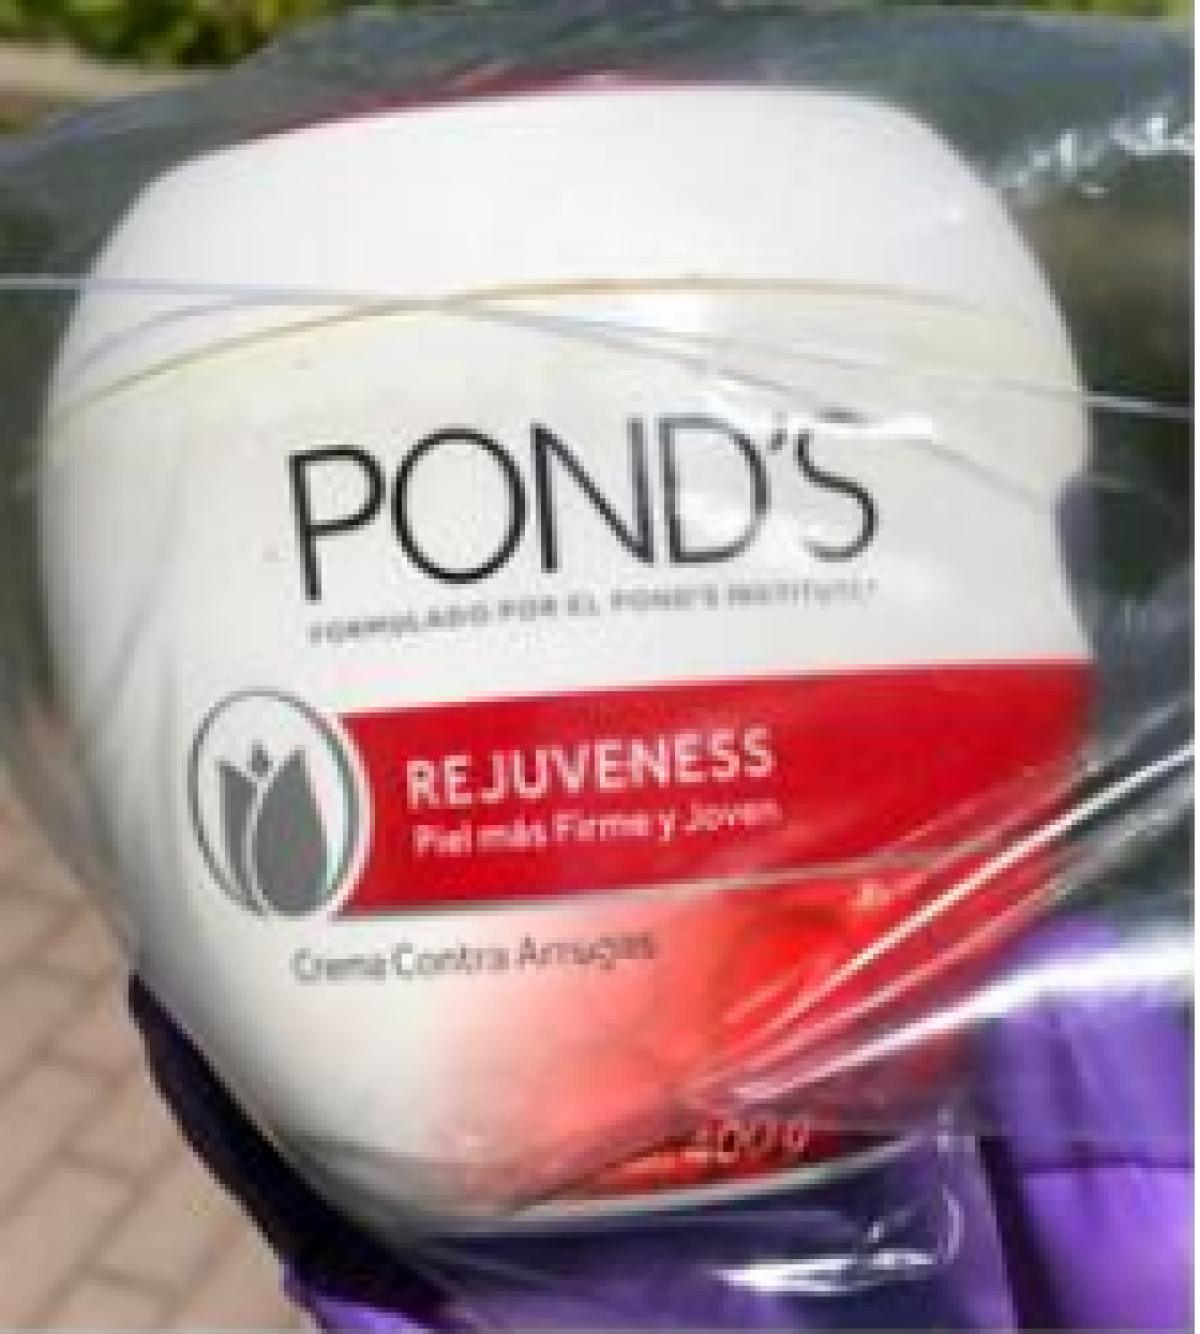 This Pond's cream bottle included extremely high levels of mercury.